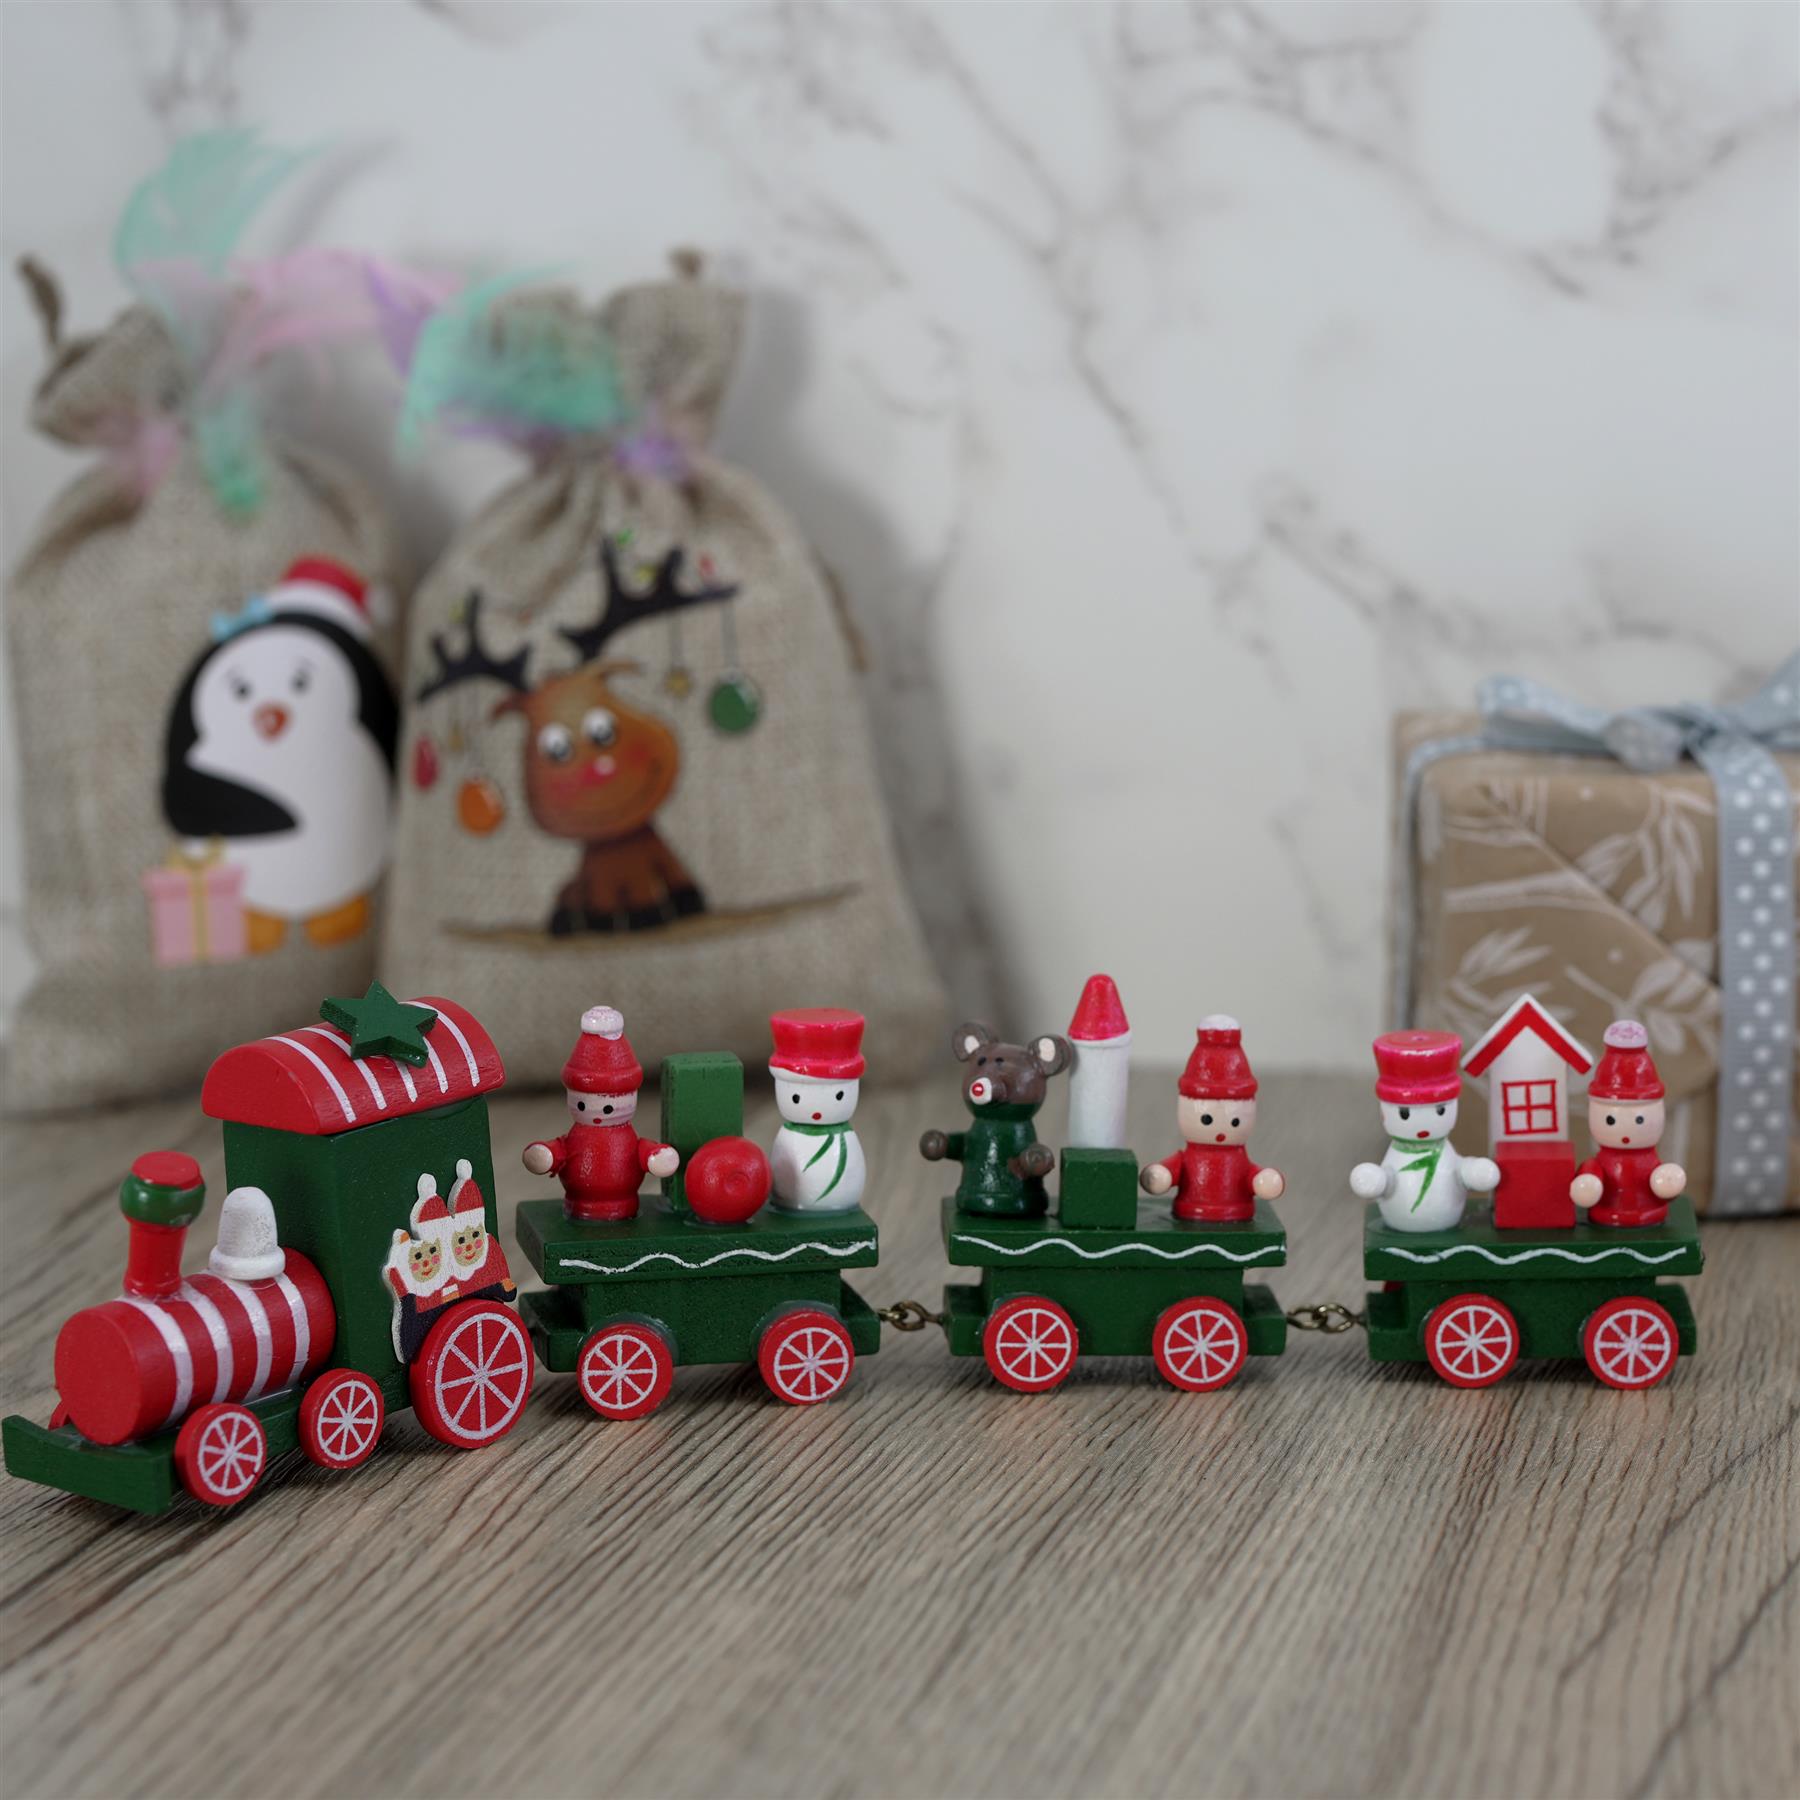 Christmas Train by The Magic Toy Shop - The Magic Toy Shop